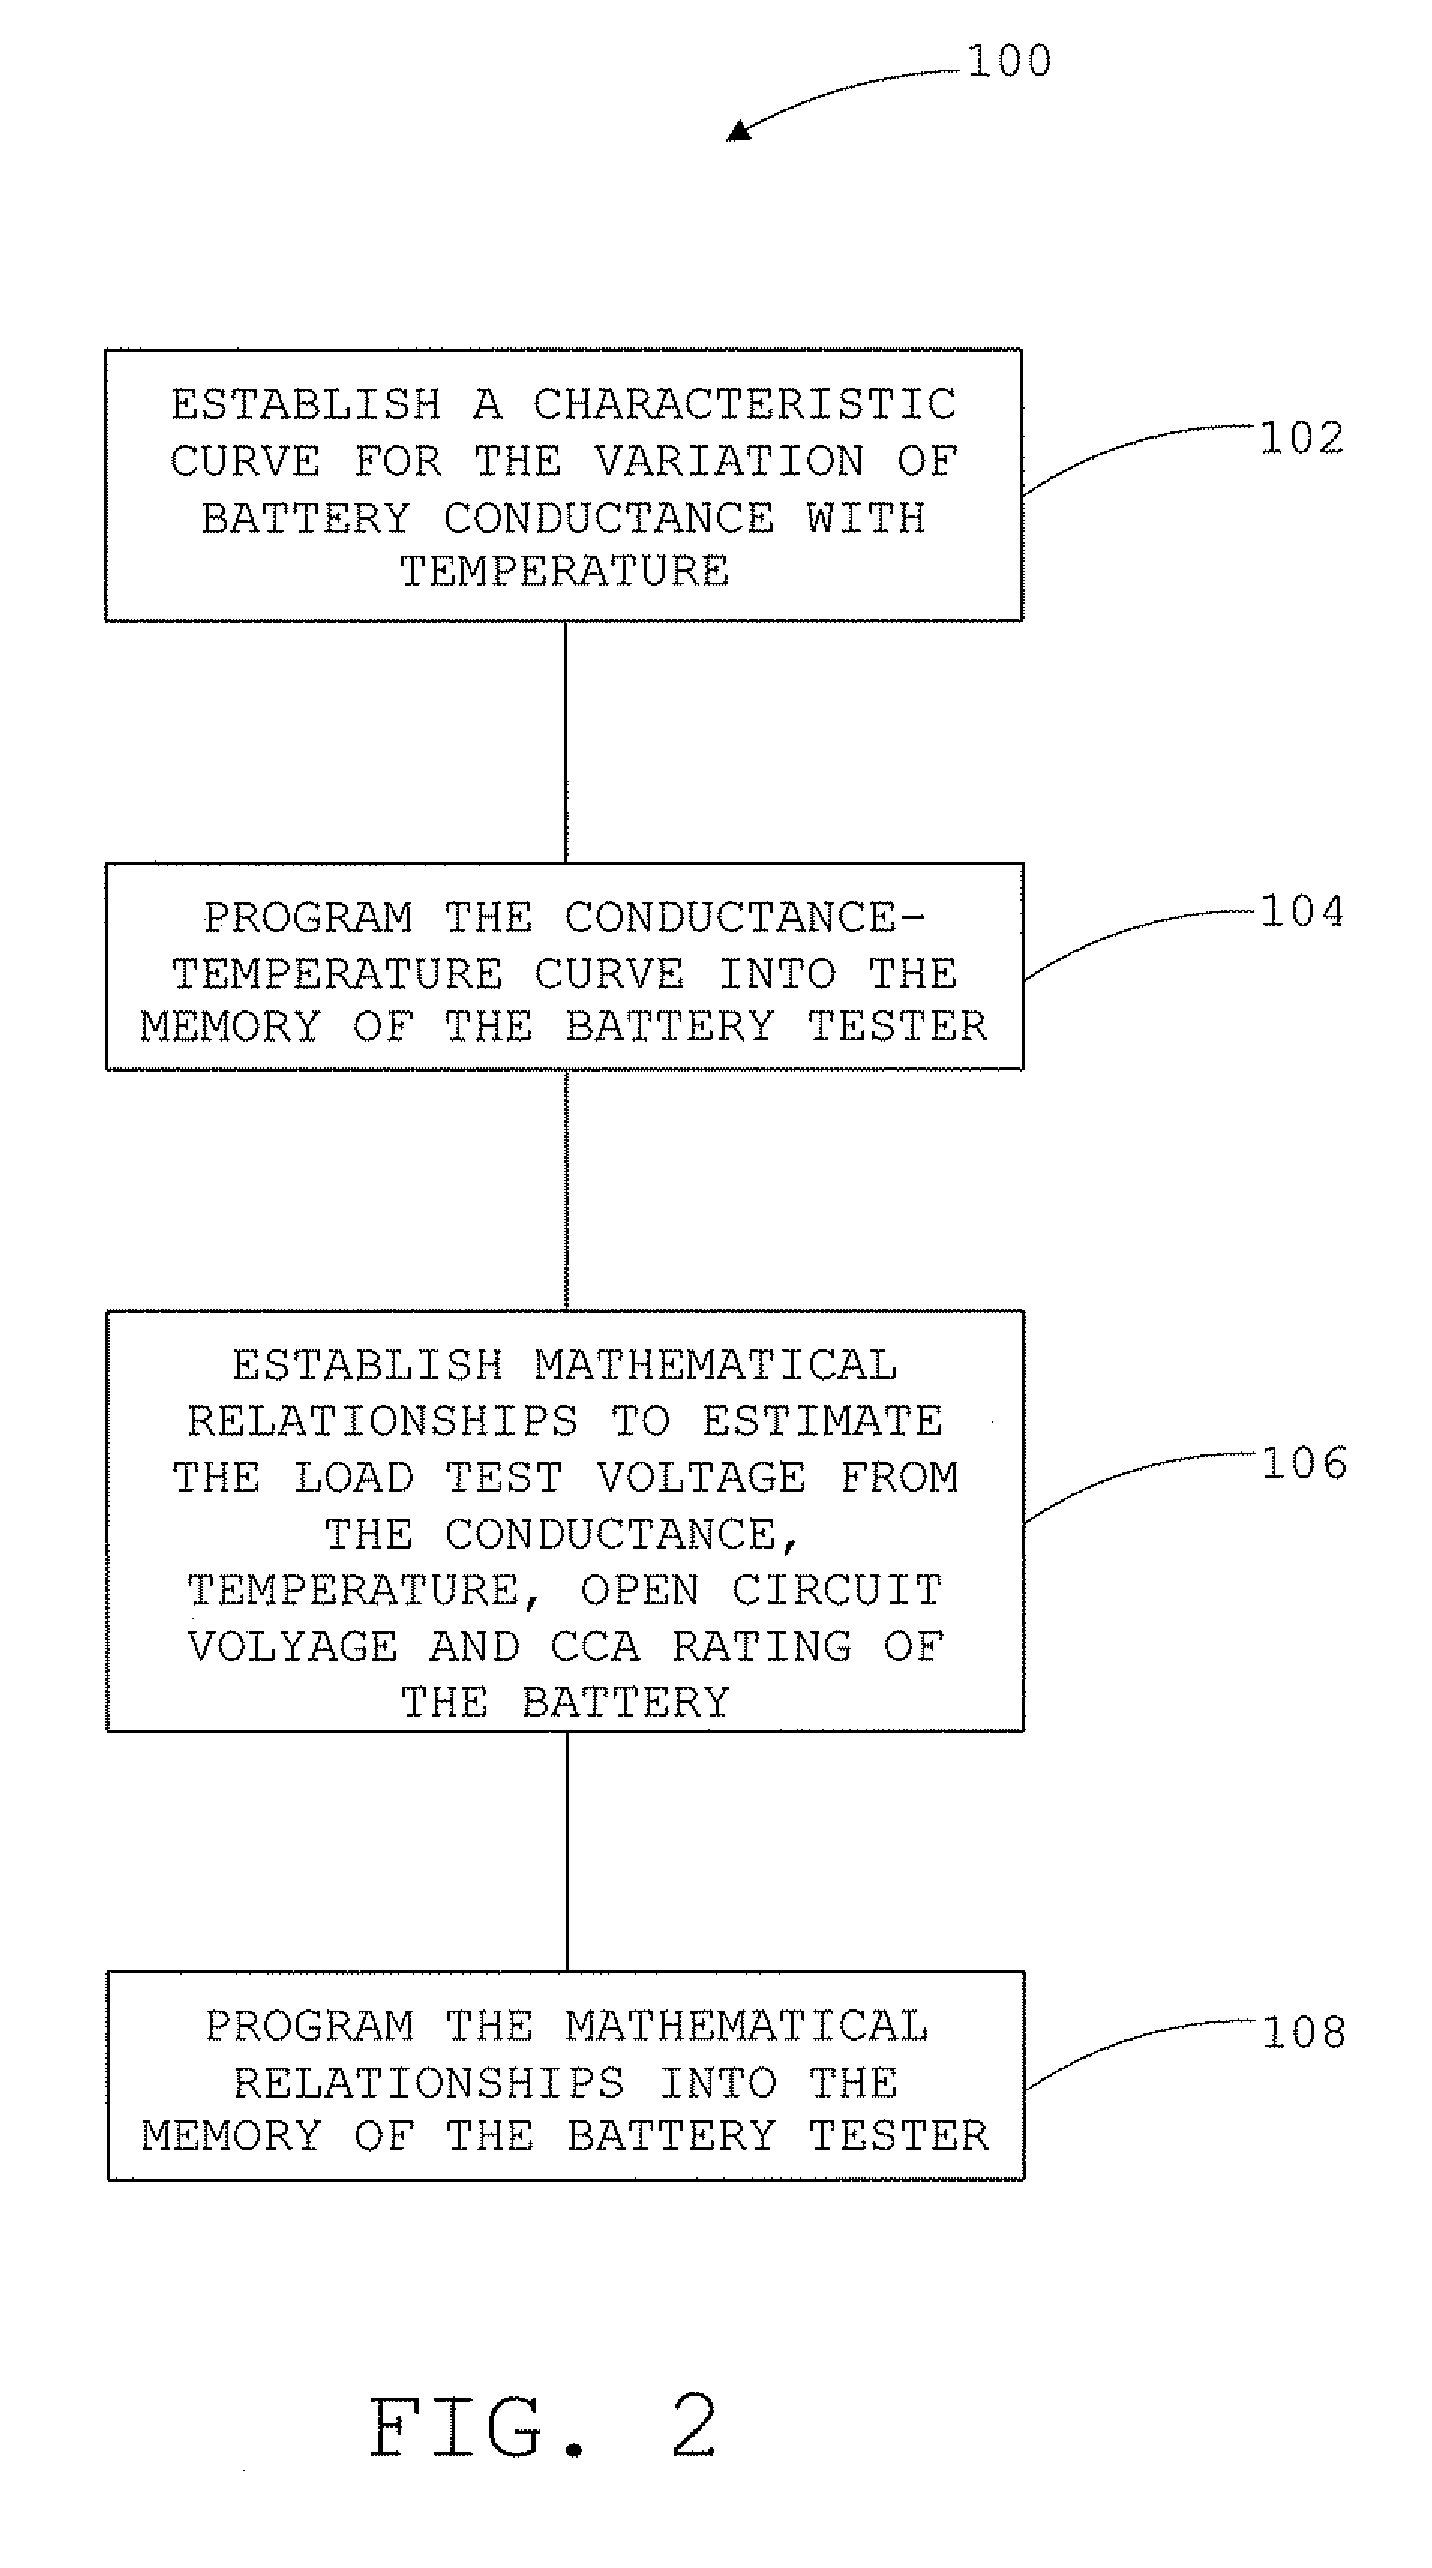 Electronic battery tester configured to predict a load test result based on open circuit voltage, temperature, cranking size rating, and a dynamic parameter